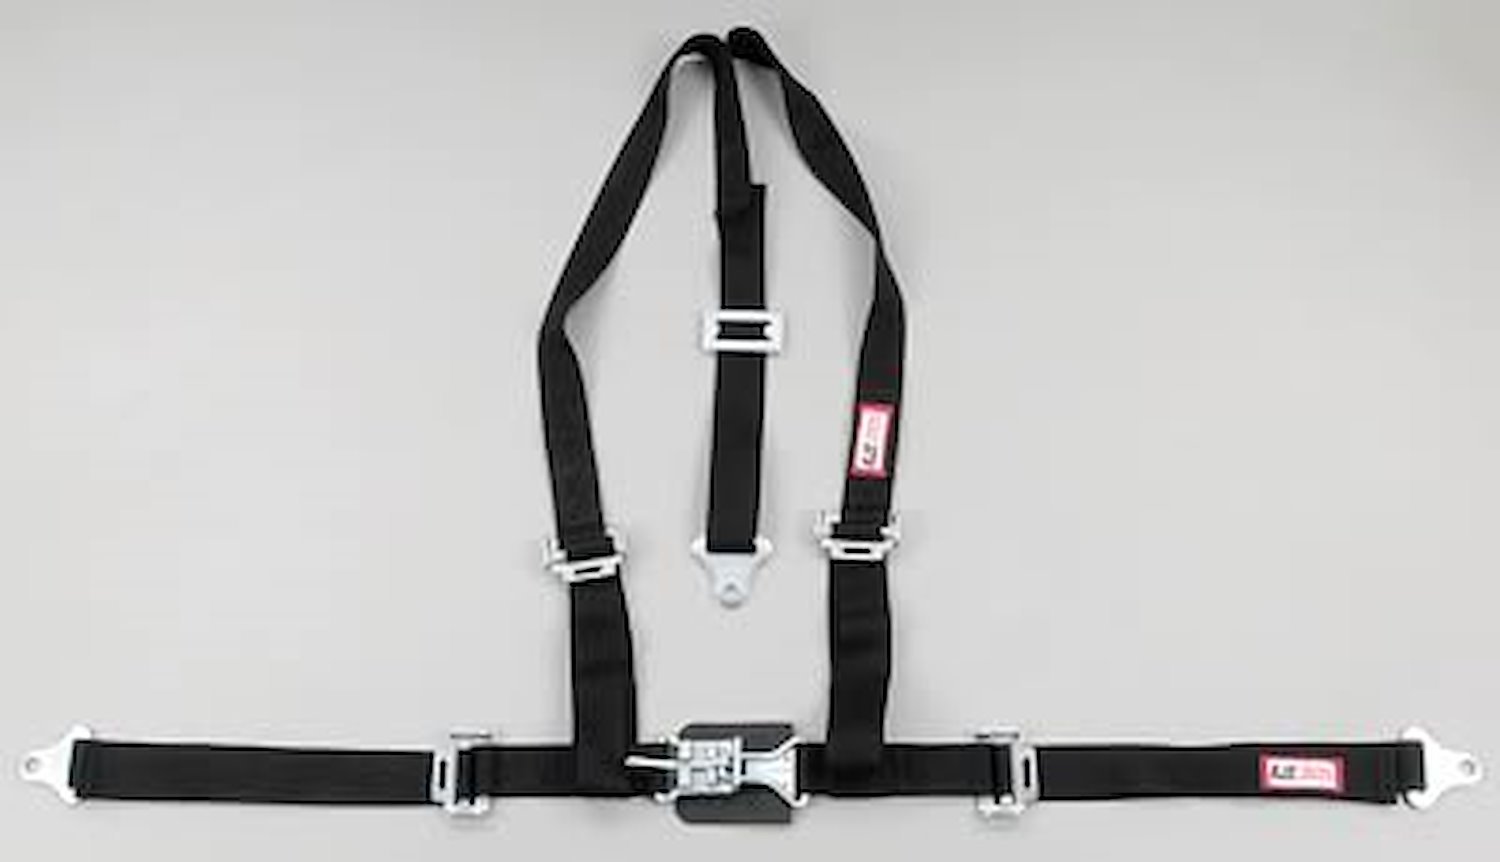 NON-SFI L&L HARNESS 2 PULL DOWN Lap Belt w/Adjuster SNAP 2 S.H. Individual FLOOR MOUNT w/STERNUM STRAP WRAP/SNAP HOT PINK